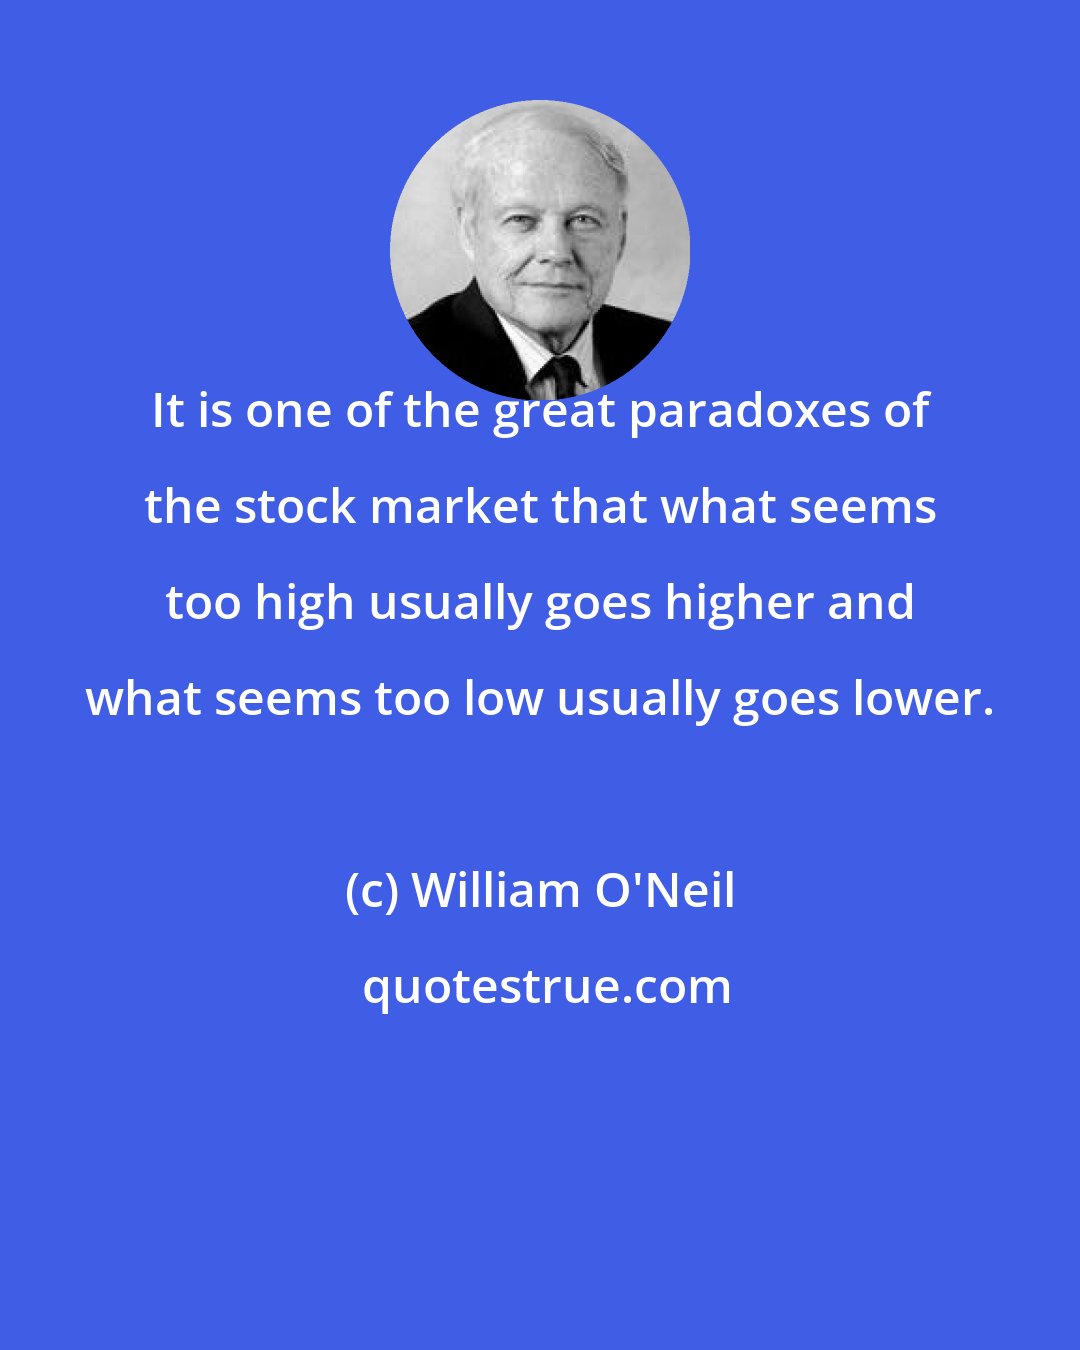 William O'Neil: It is one of the great paradoxes of the stock market that what seems too high usually goes higher and what seems too low usually goes lower.